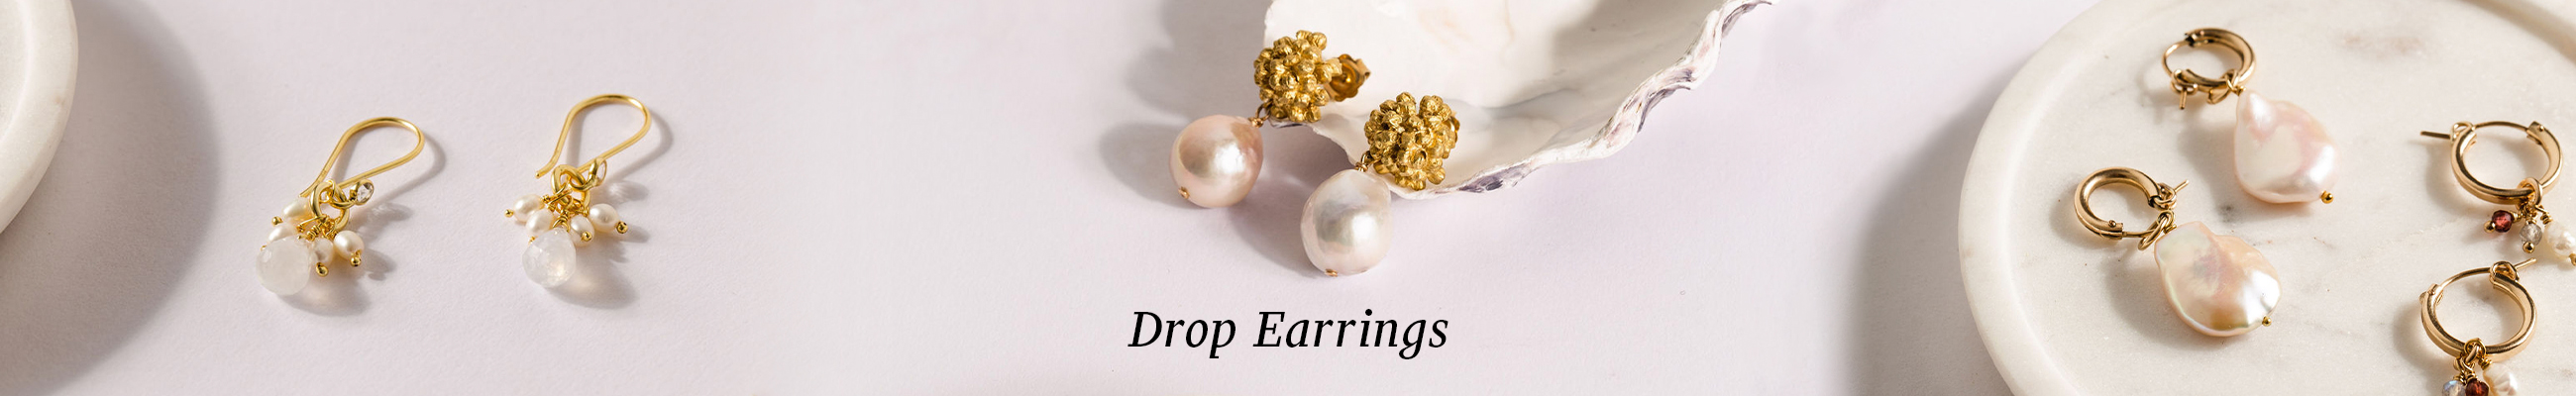 6a215cb3-6ee7-44ed-a3ff-4f8d85f18992Collection_Banner_Earrings_DropEarrings.jpg